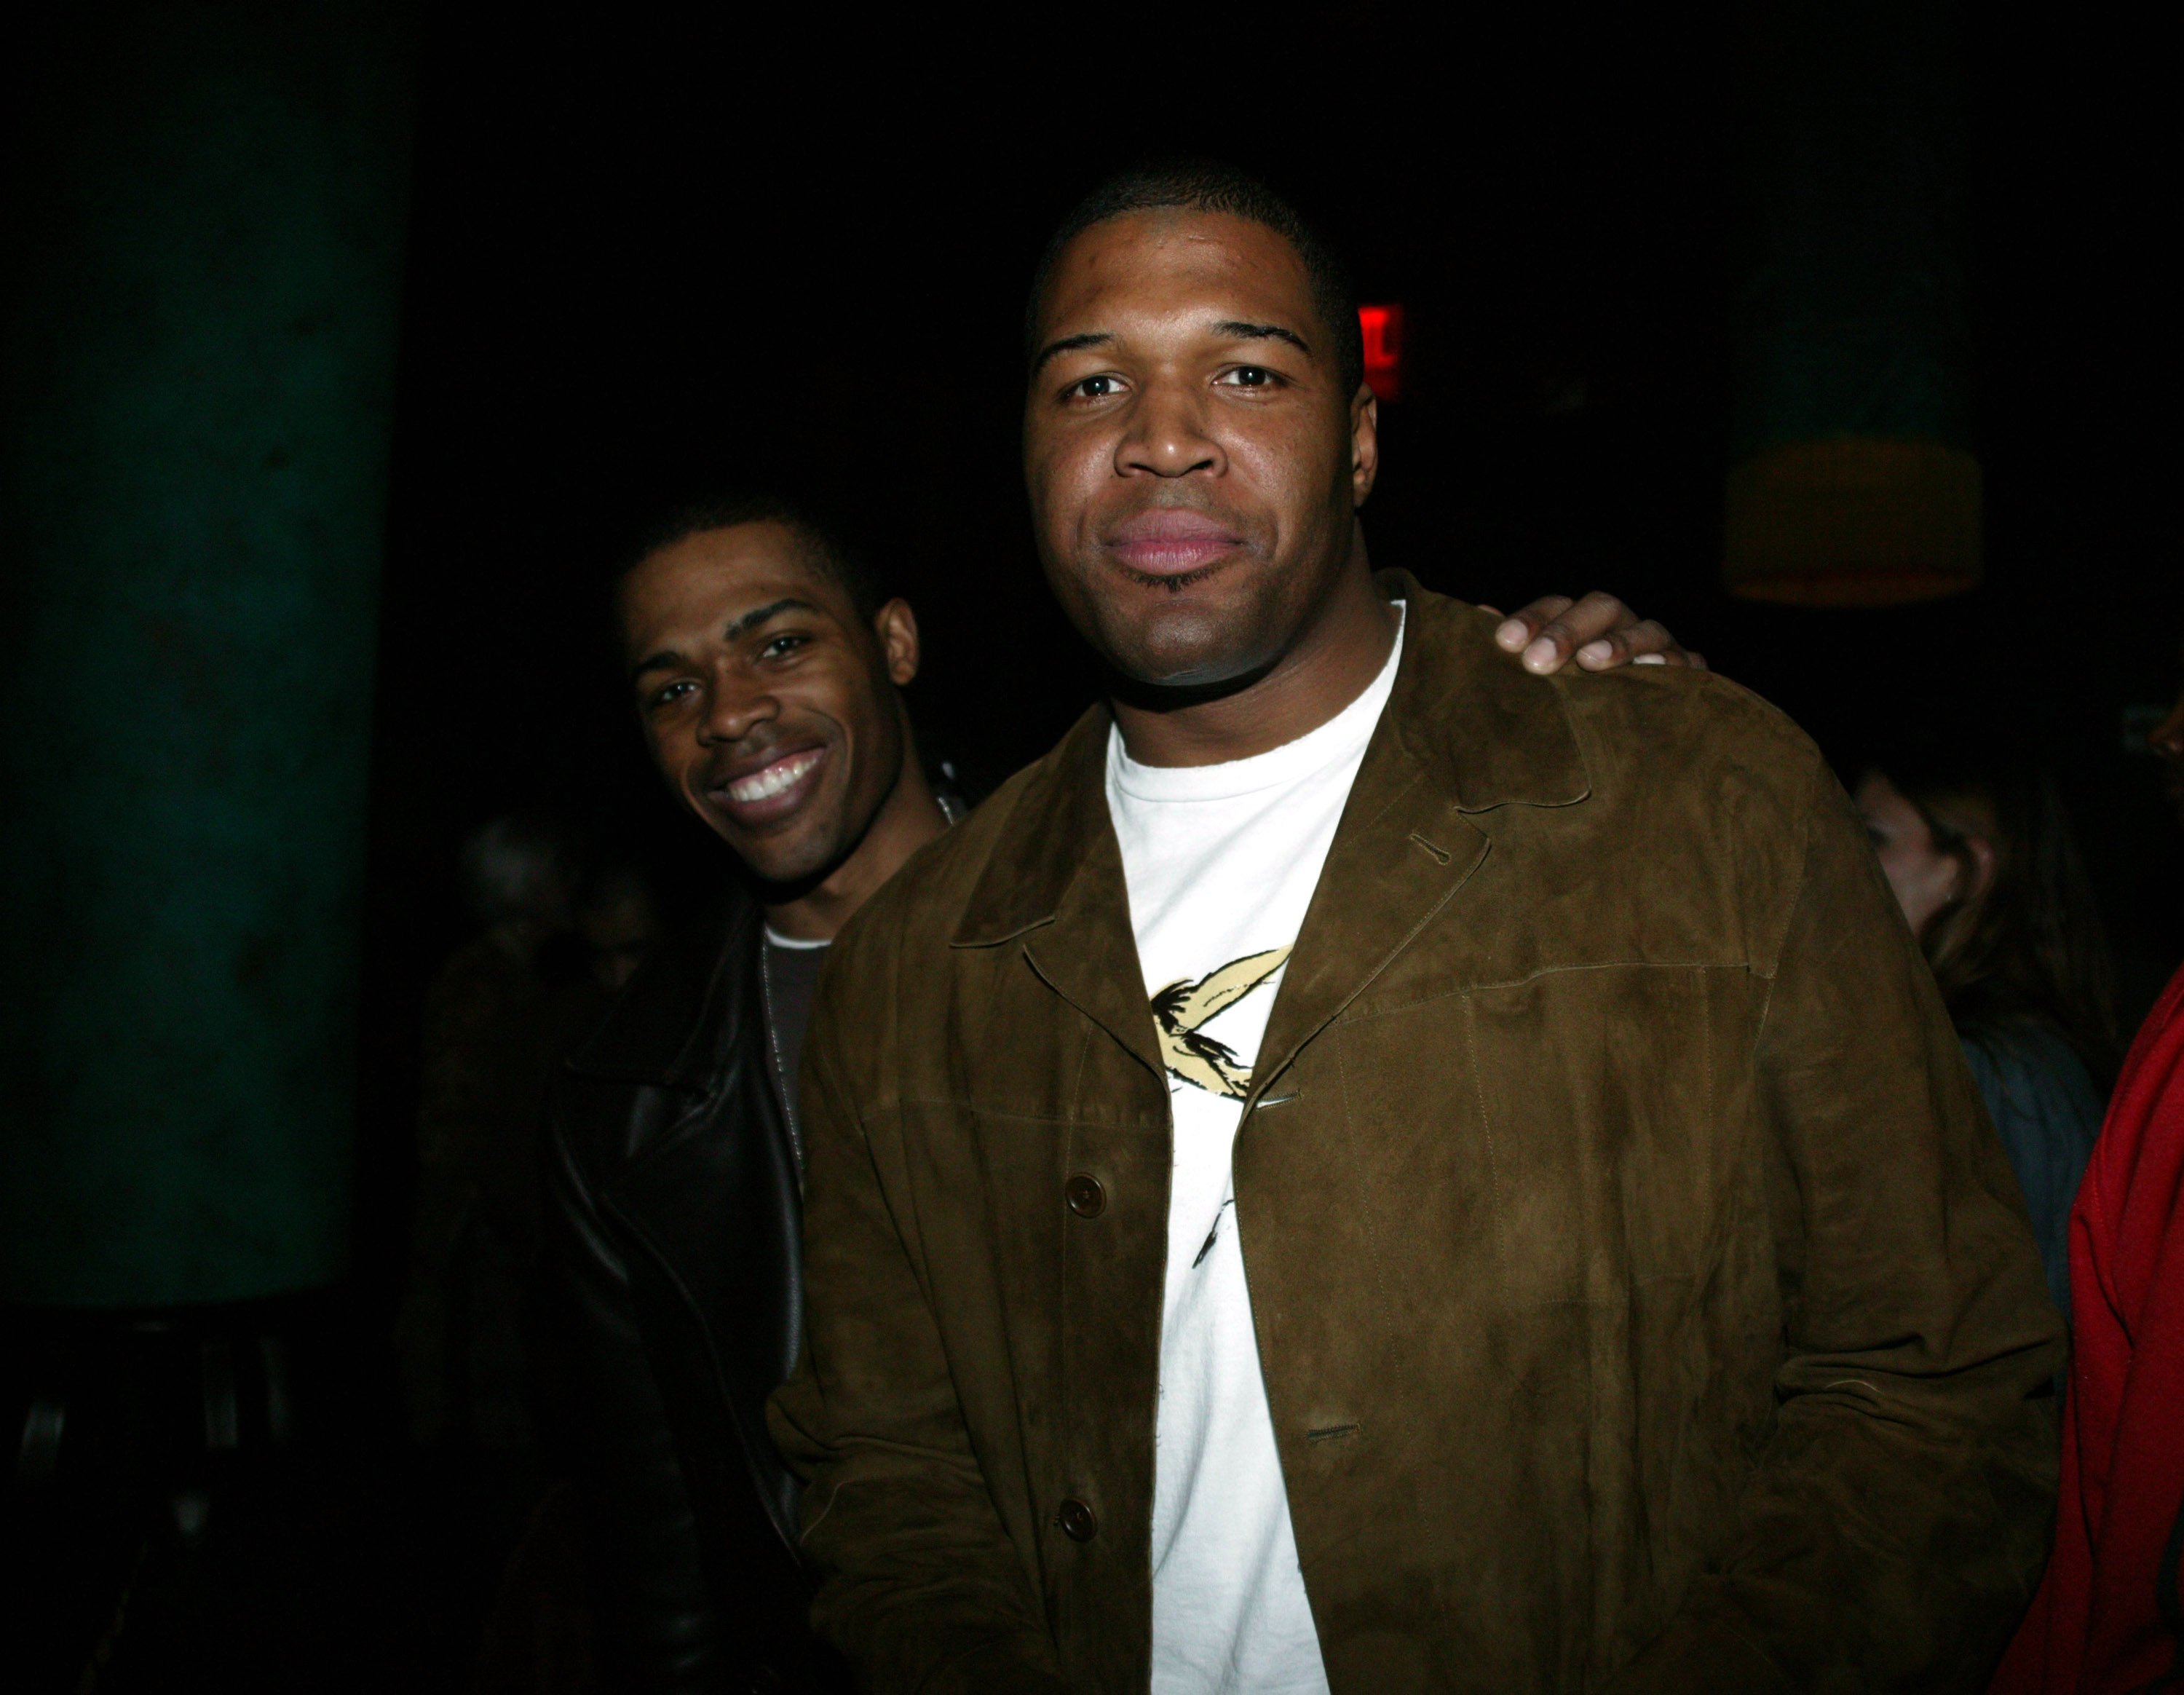 Dr. Ian Smith and Michael Strahan at the Phat Farm Magic Party in Nevada, Las Vegas, on February 16, 2005. | Source: Johnny Nunez/WireImage/Getty Images